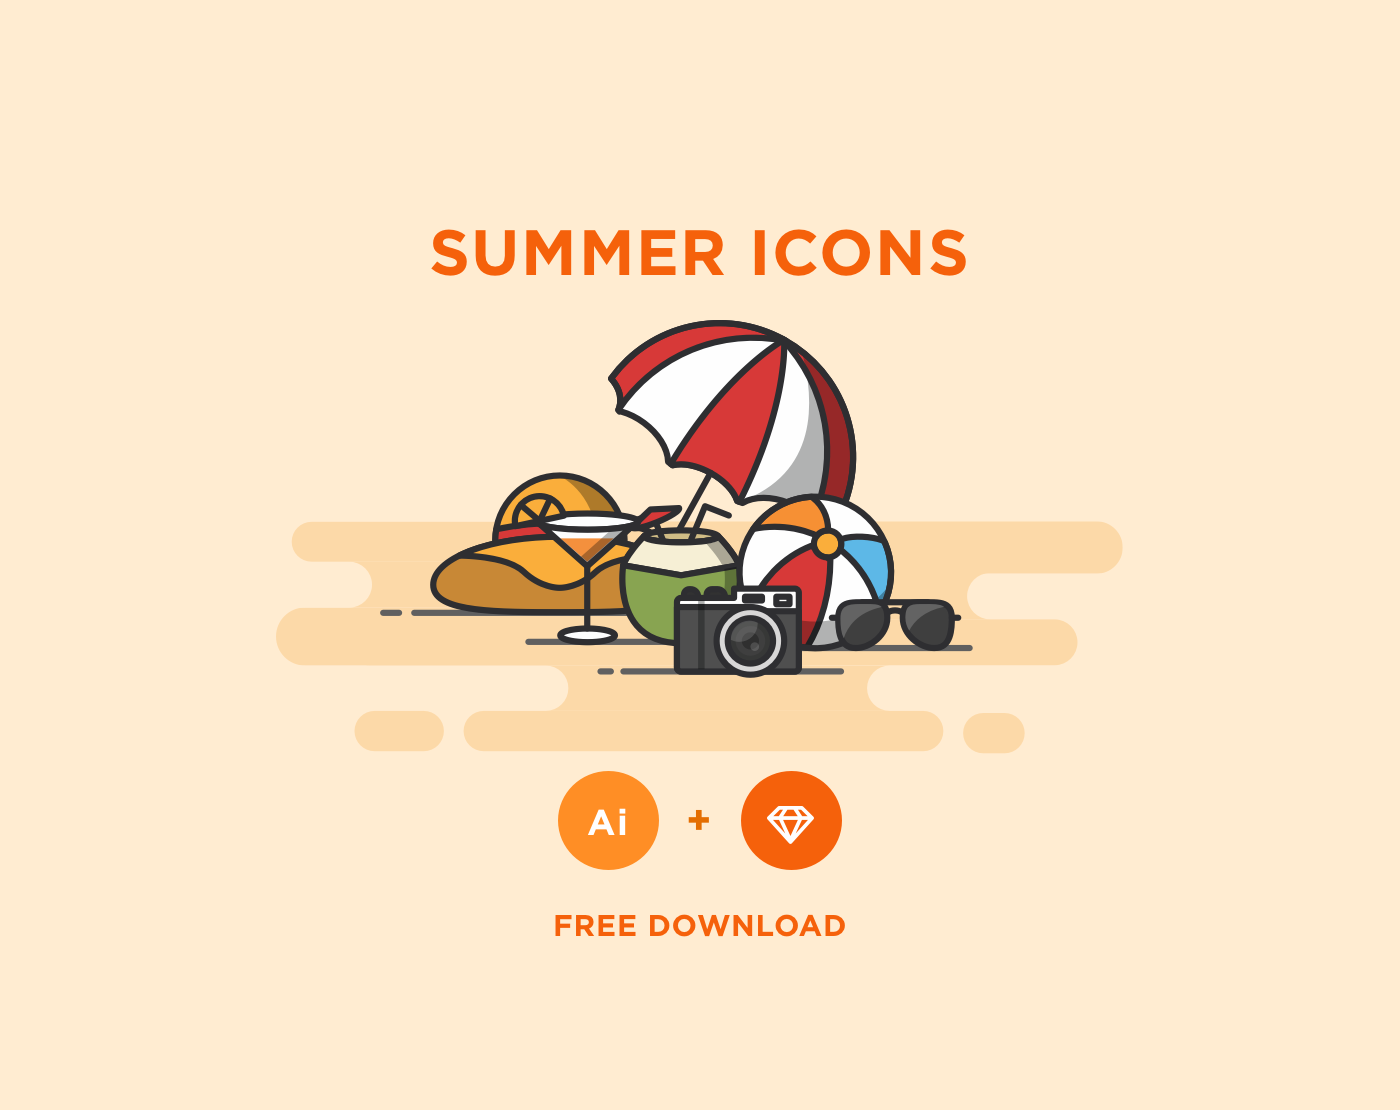 FREE - SUMMER ICONS